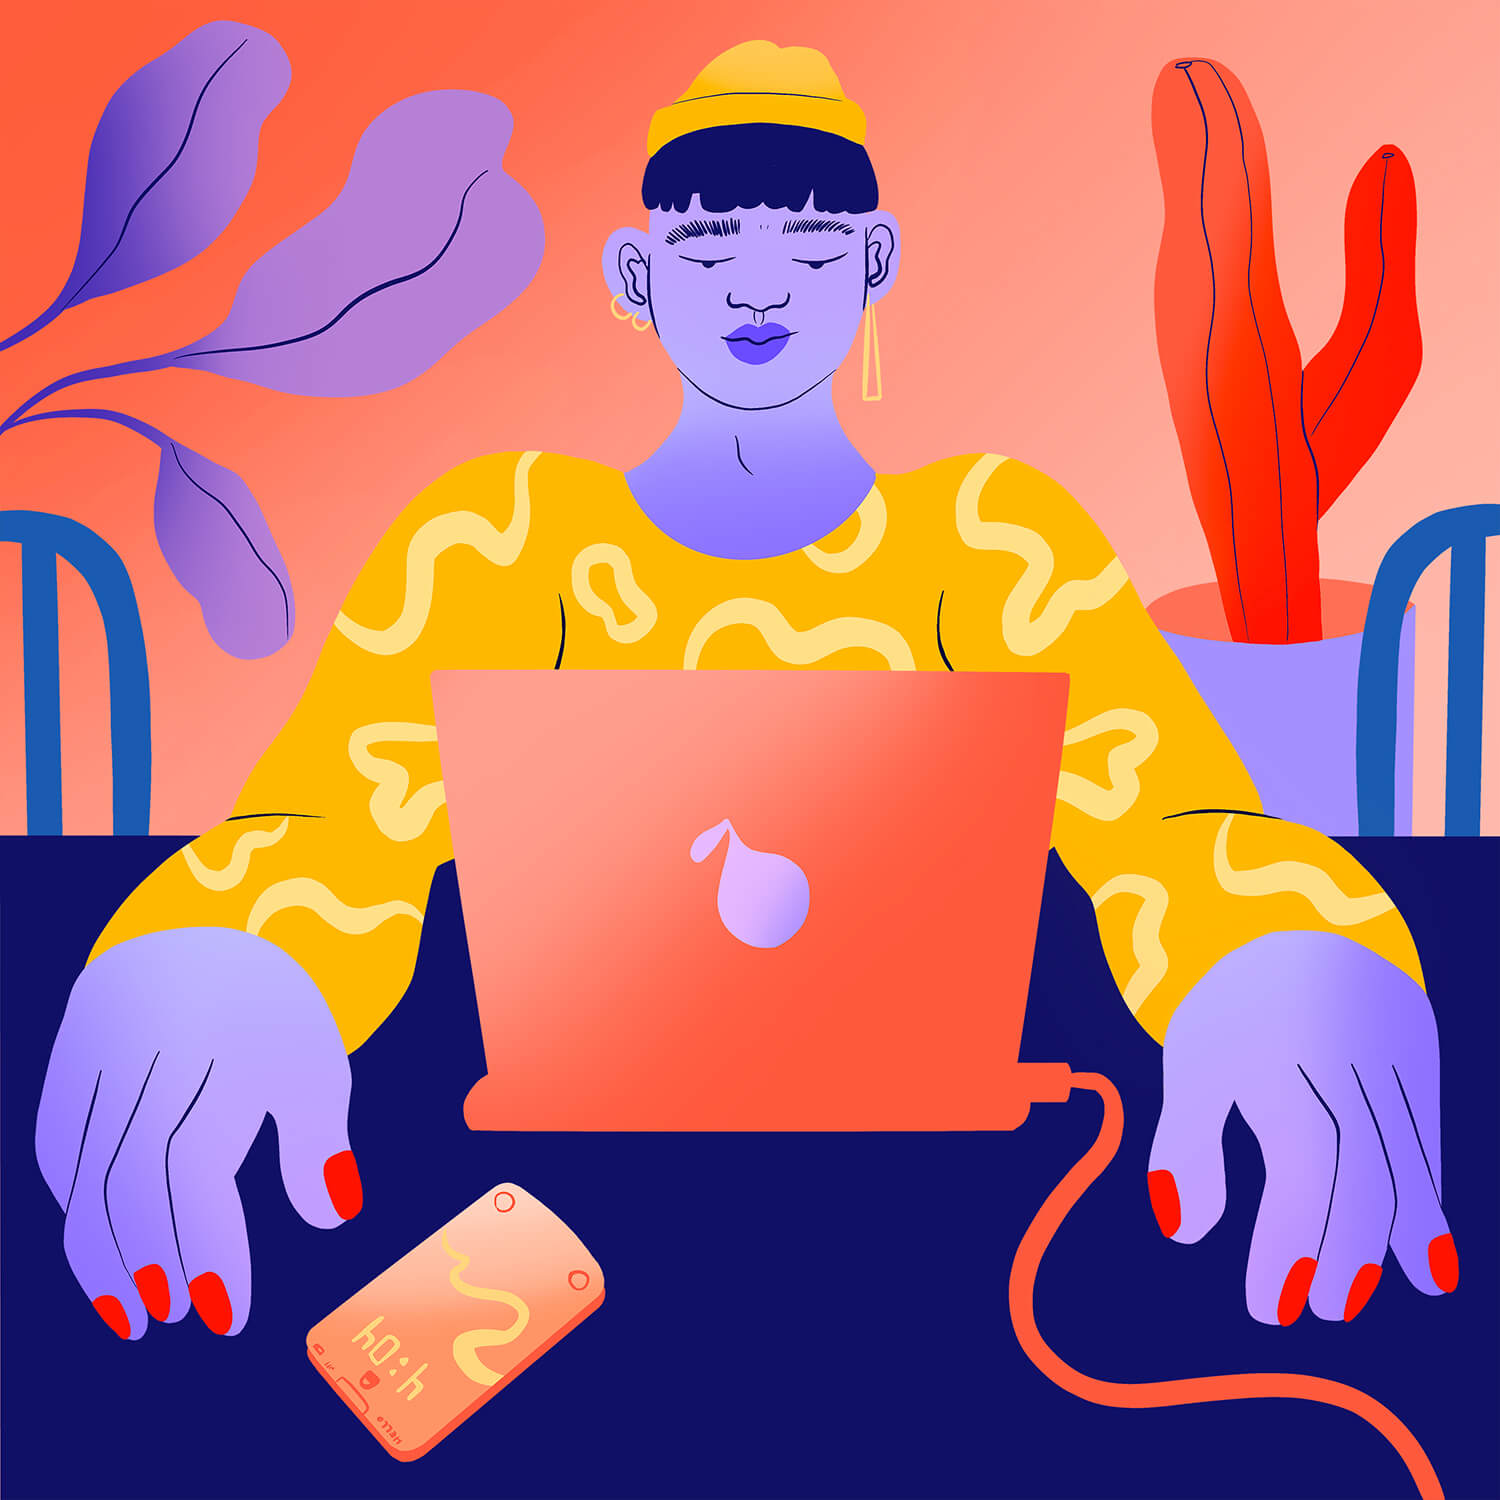 Illustration of a young person sitting at a table with houseplants behind them, looking at a laptop computer